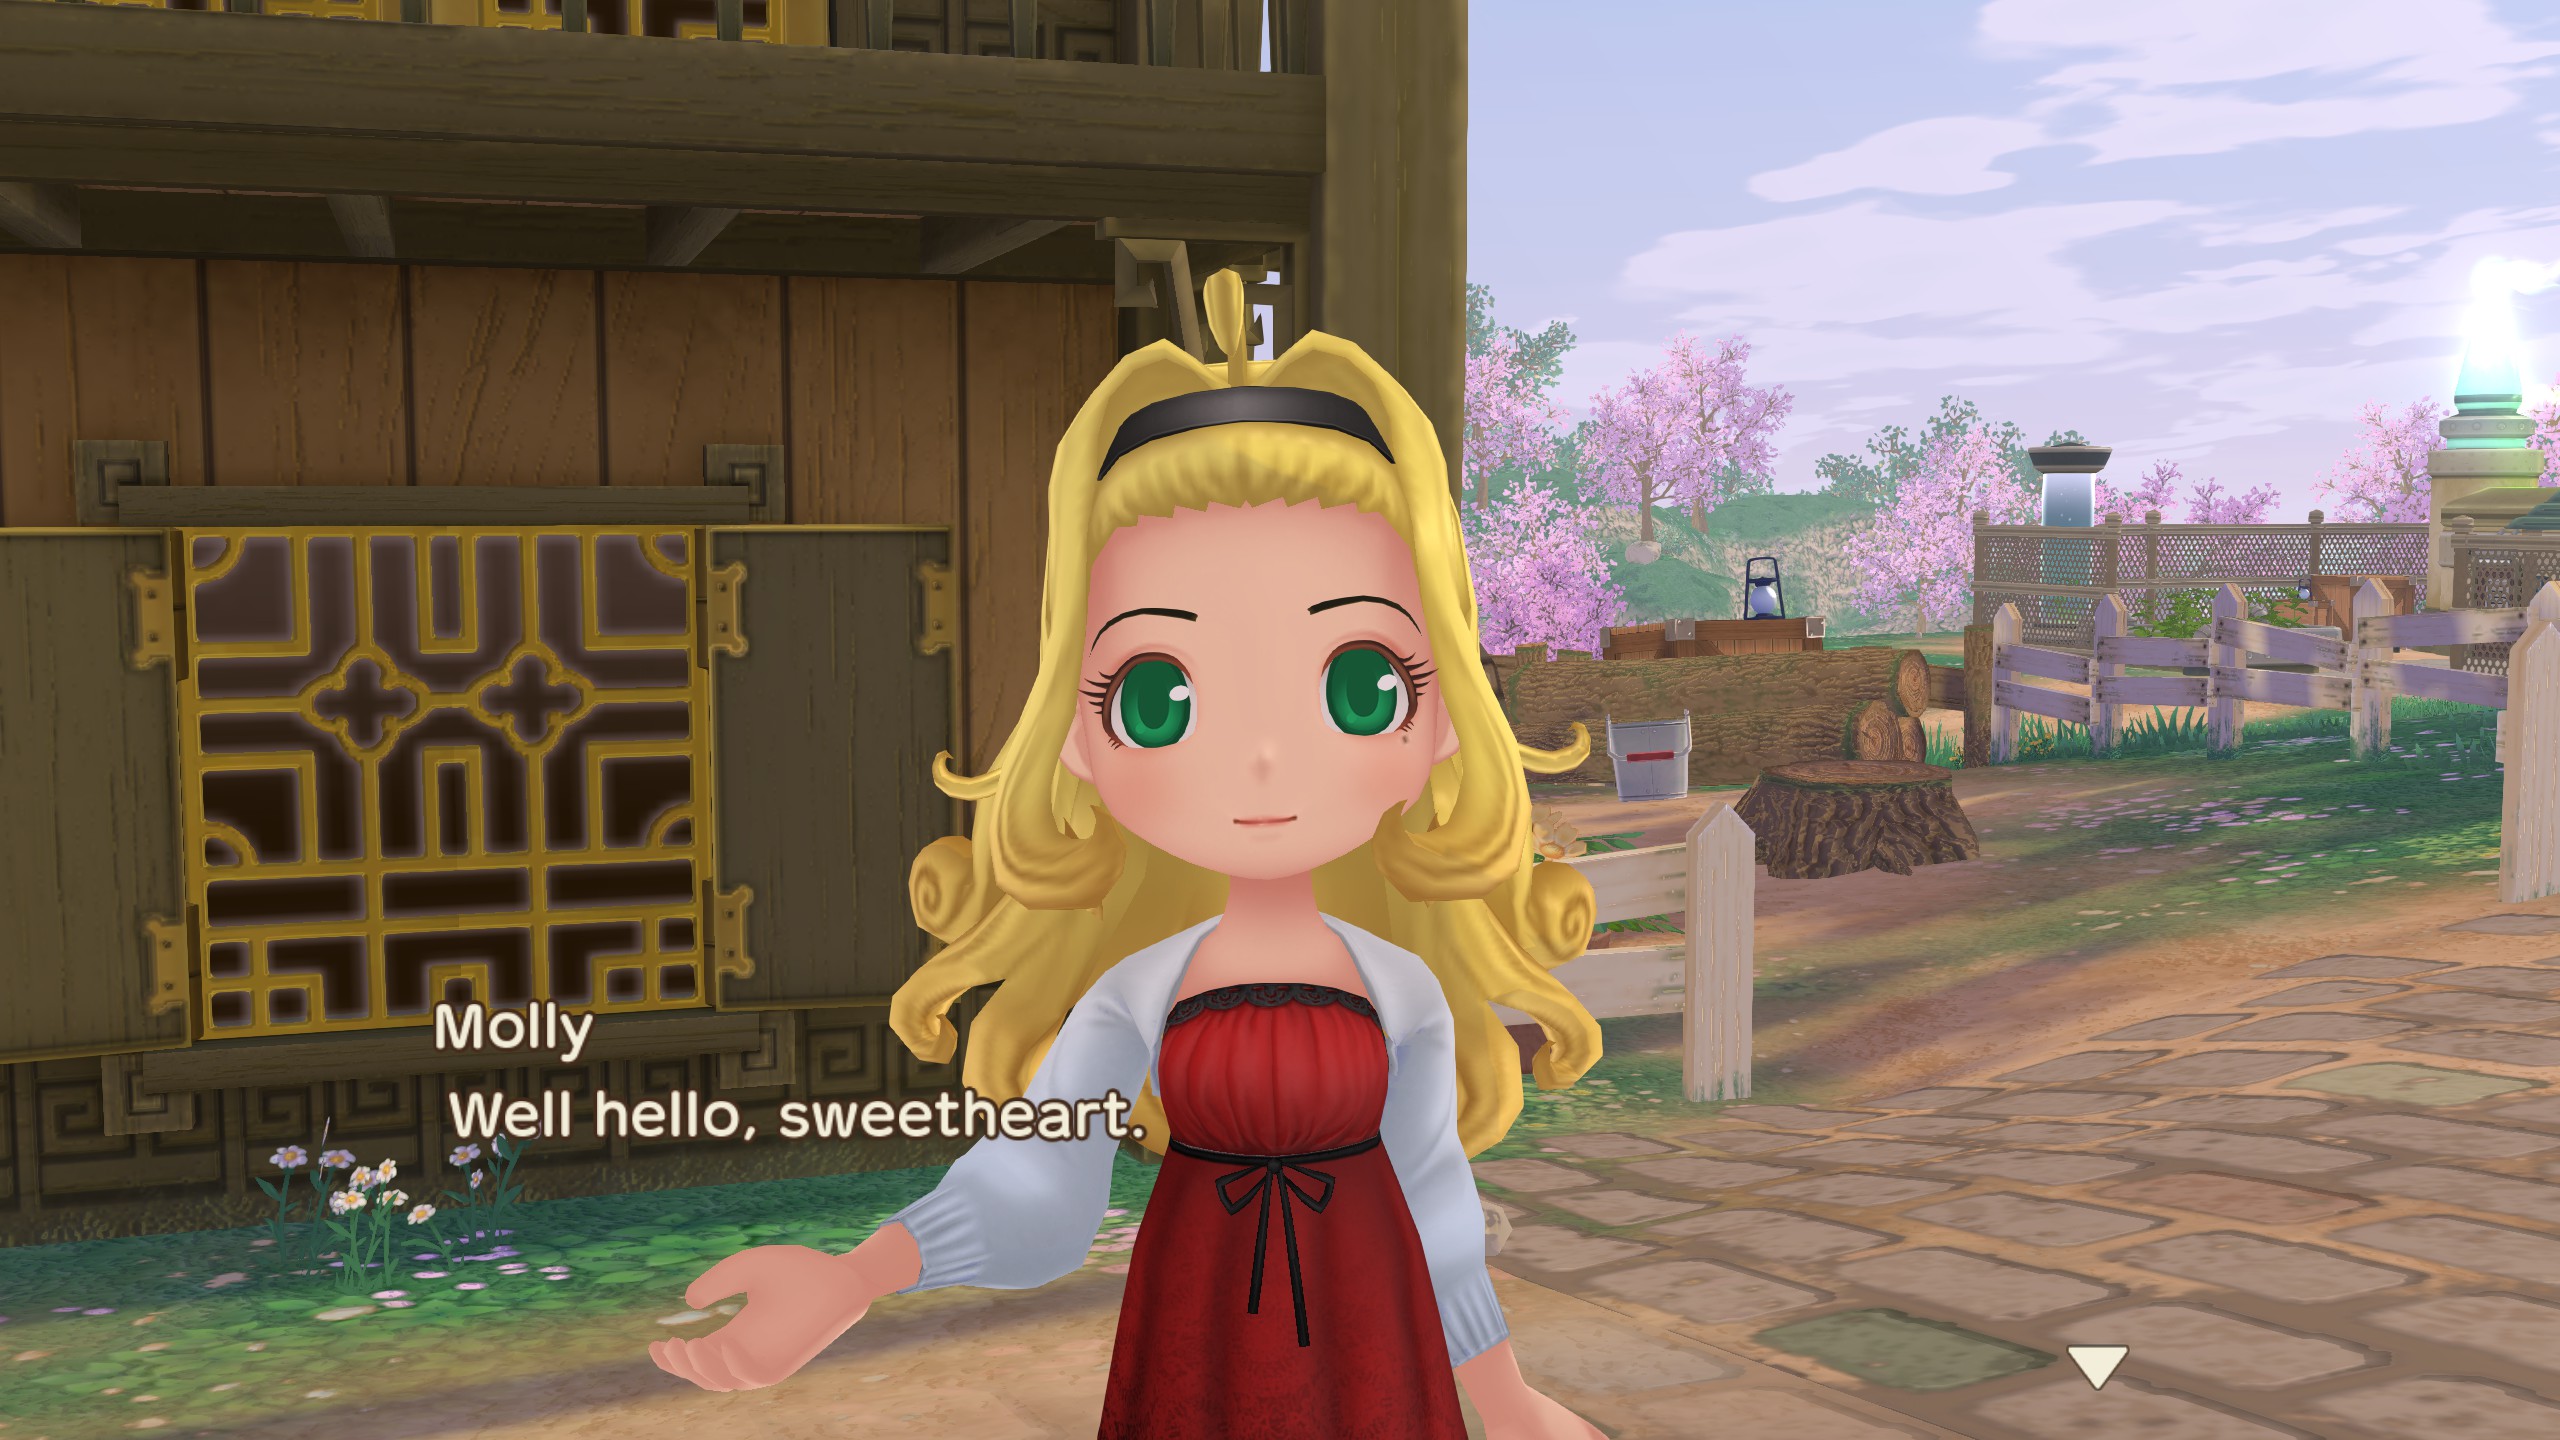 Story of Seasons: A Wonderful Life - Molly stands in front of the inn, saying 